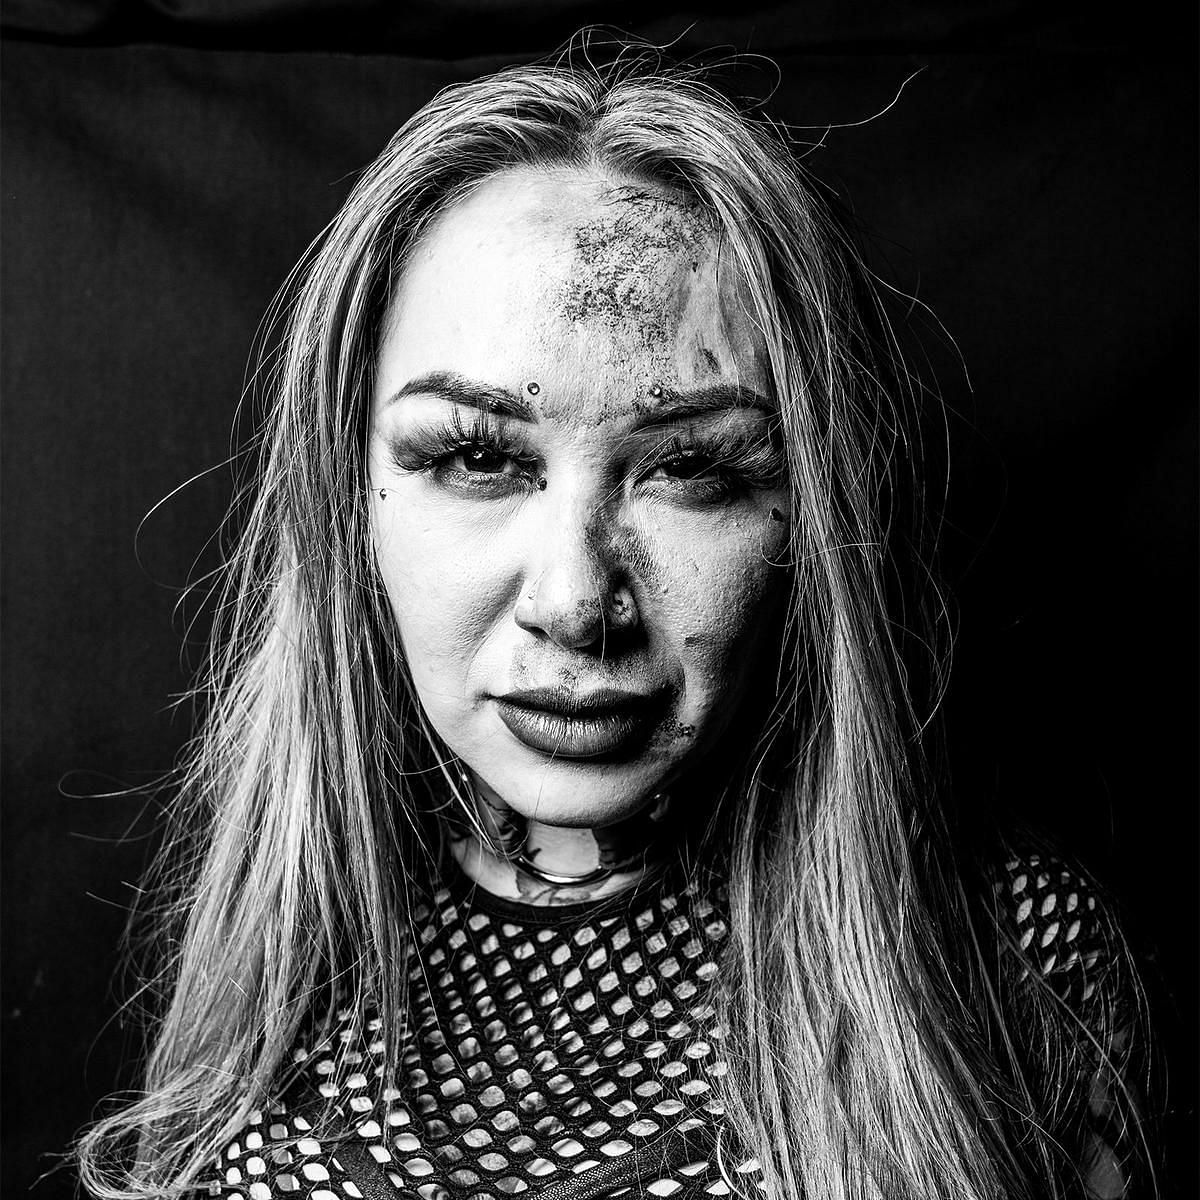 Shotzi Blackheart showing off her injury after the match!